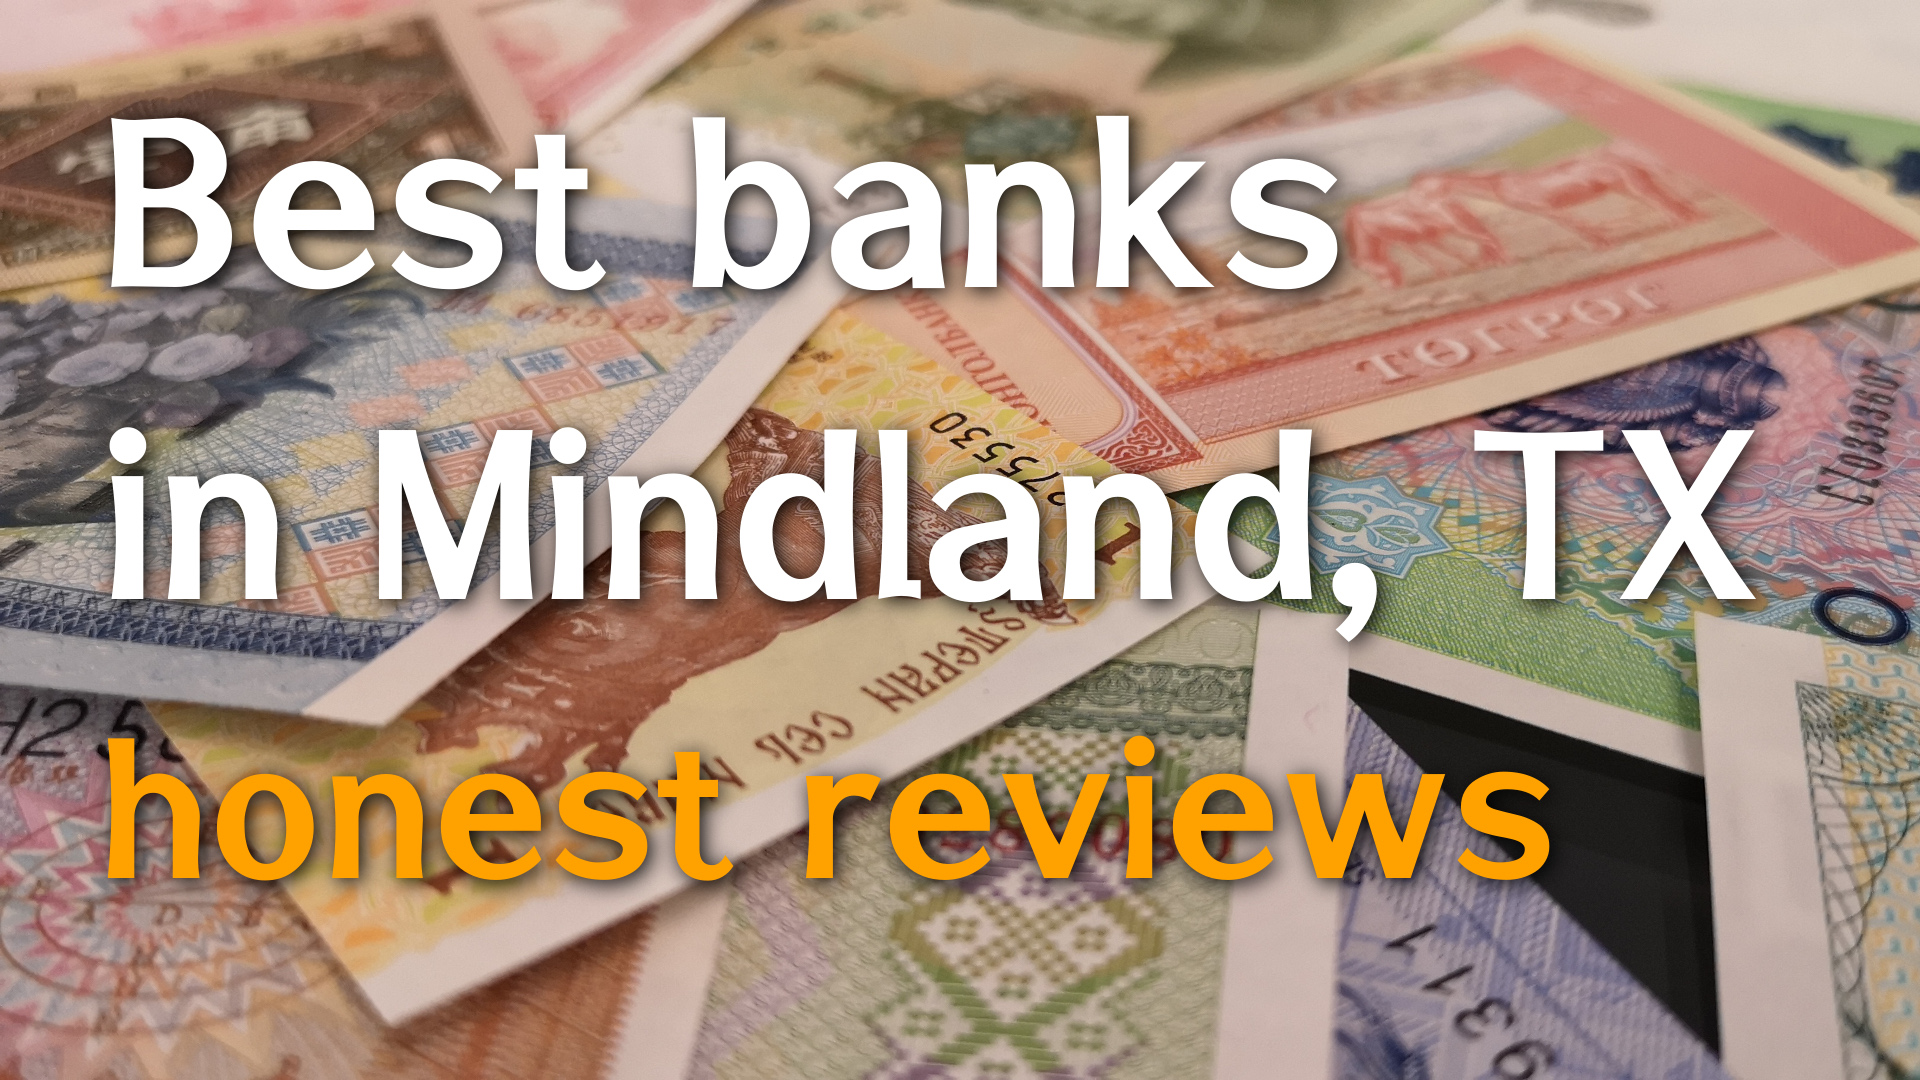 Best bank with credit card and Internet access in Midland